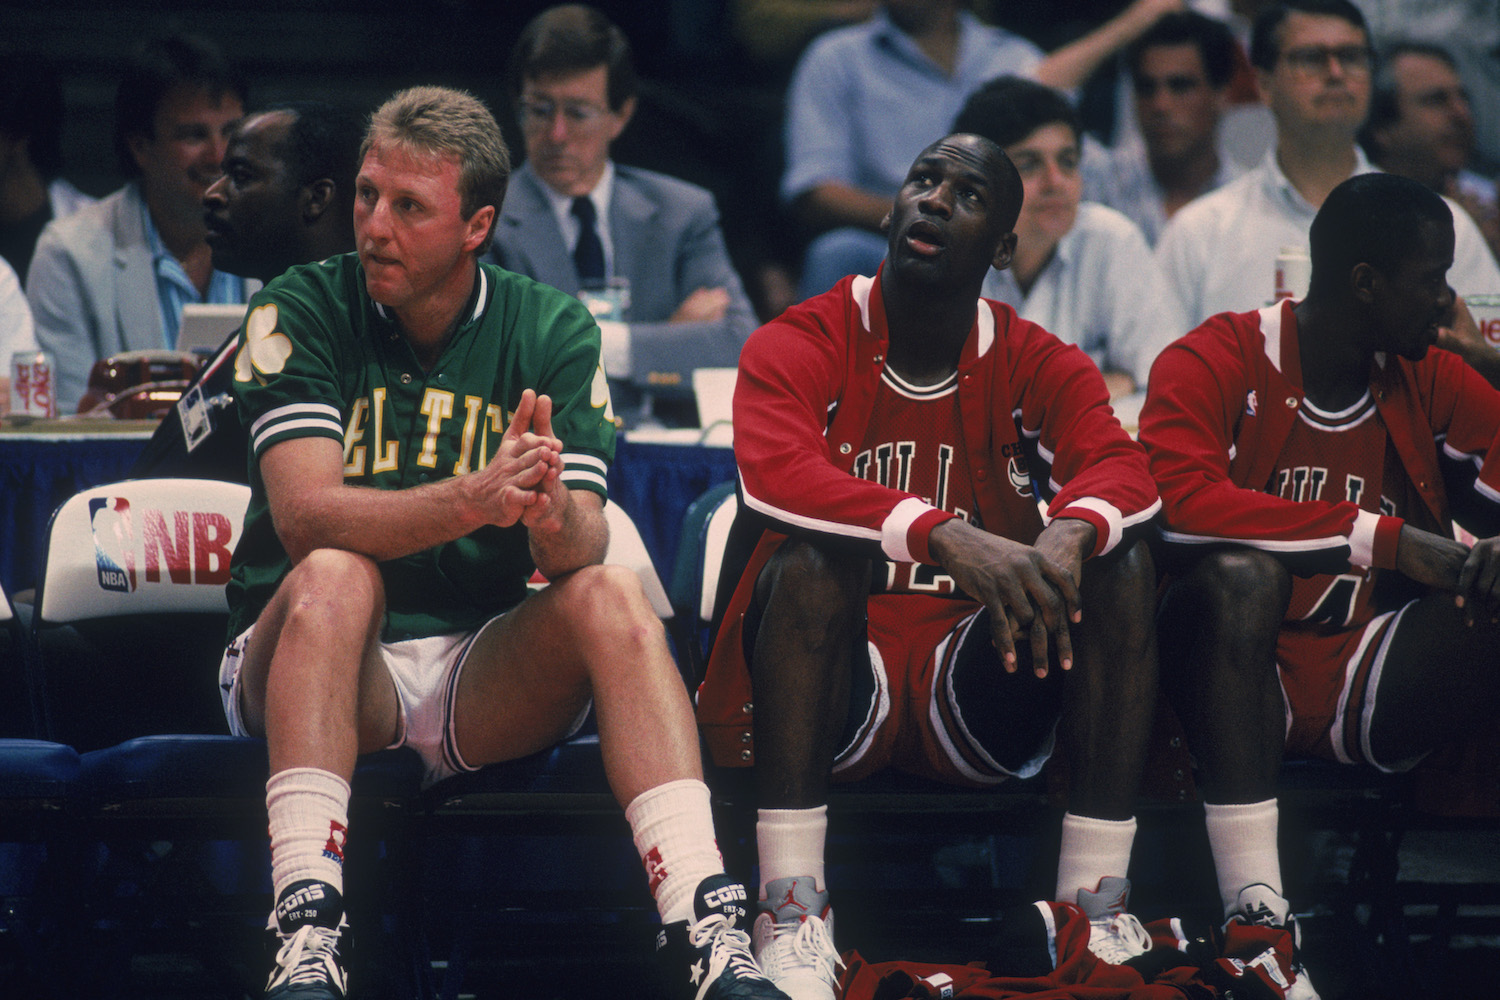 NBA stars Larry Bird and Michael Jordan sit together on the bench.